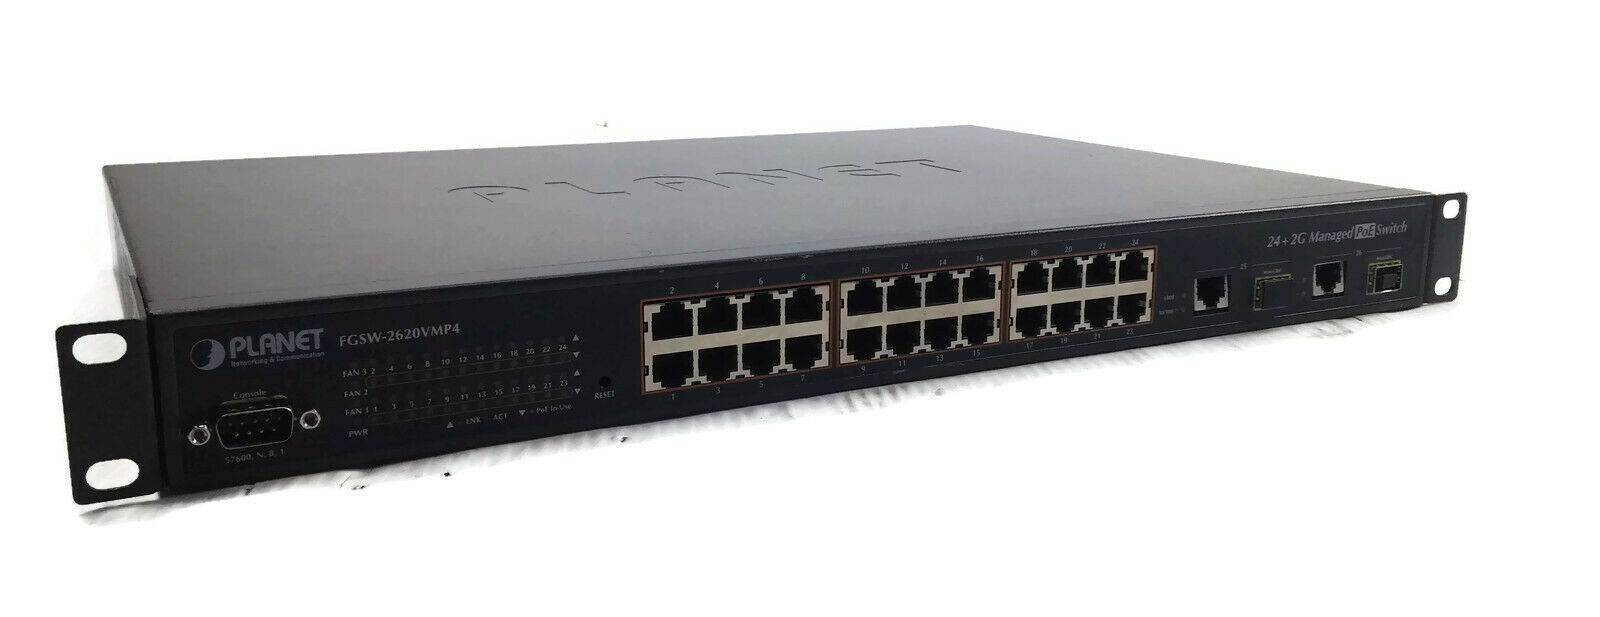 Planet Technology Managed Poe Switch 24 Port And 2 Port Gigabyte  Fgsw-2620vmp4 